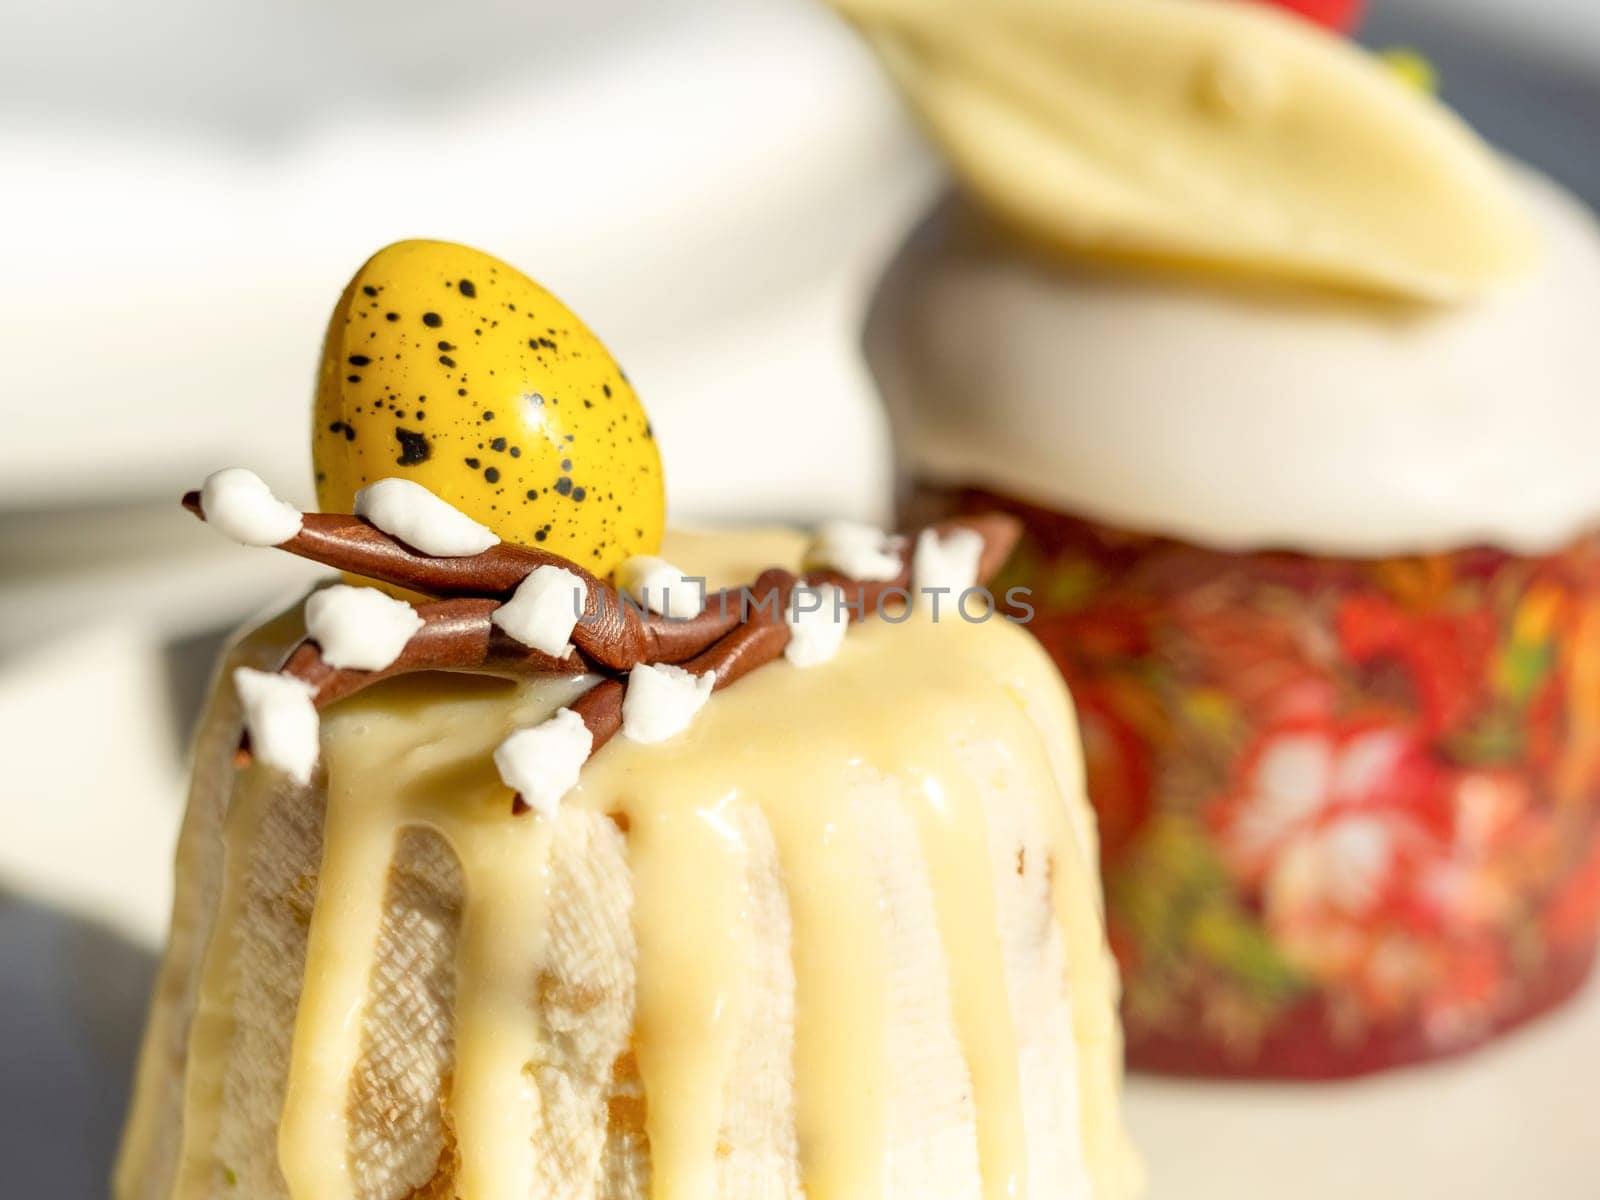 Traditional Easter cottage cheese dessert Paskha decorated with quail eggs and chocolate willow on tabletop background. Modern Orthodox Easter background with two mini cottage curd desserts Paskha